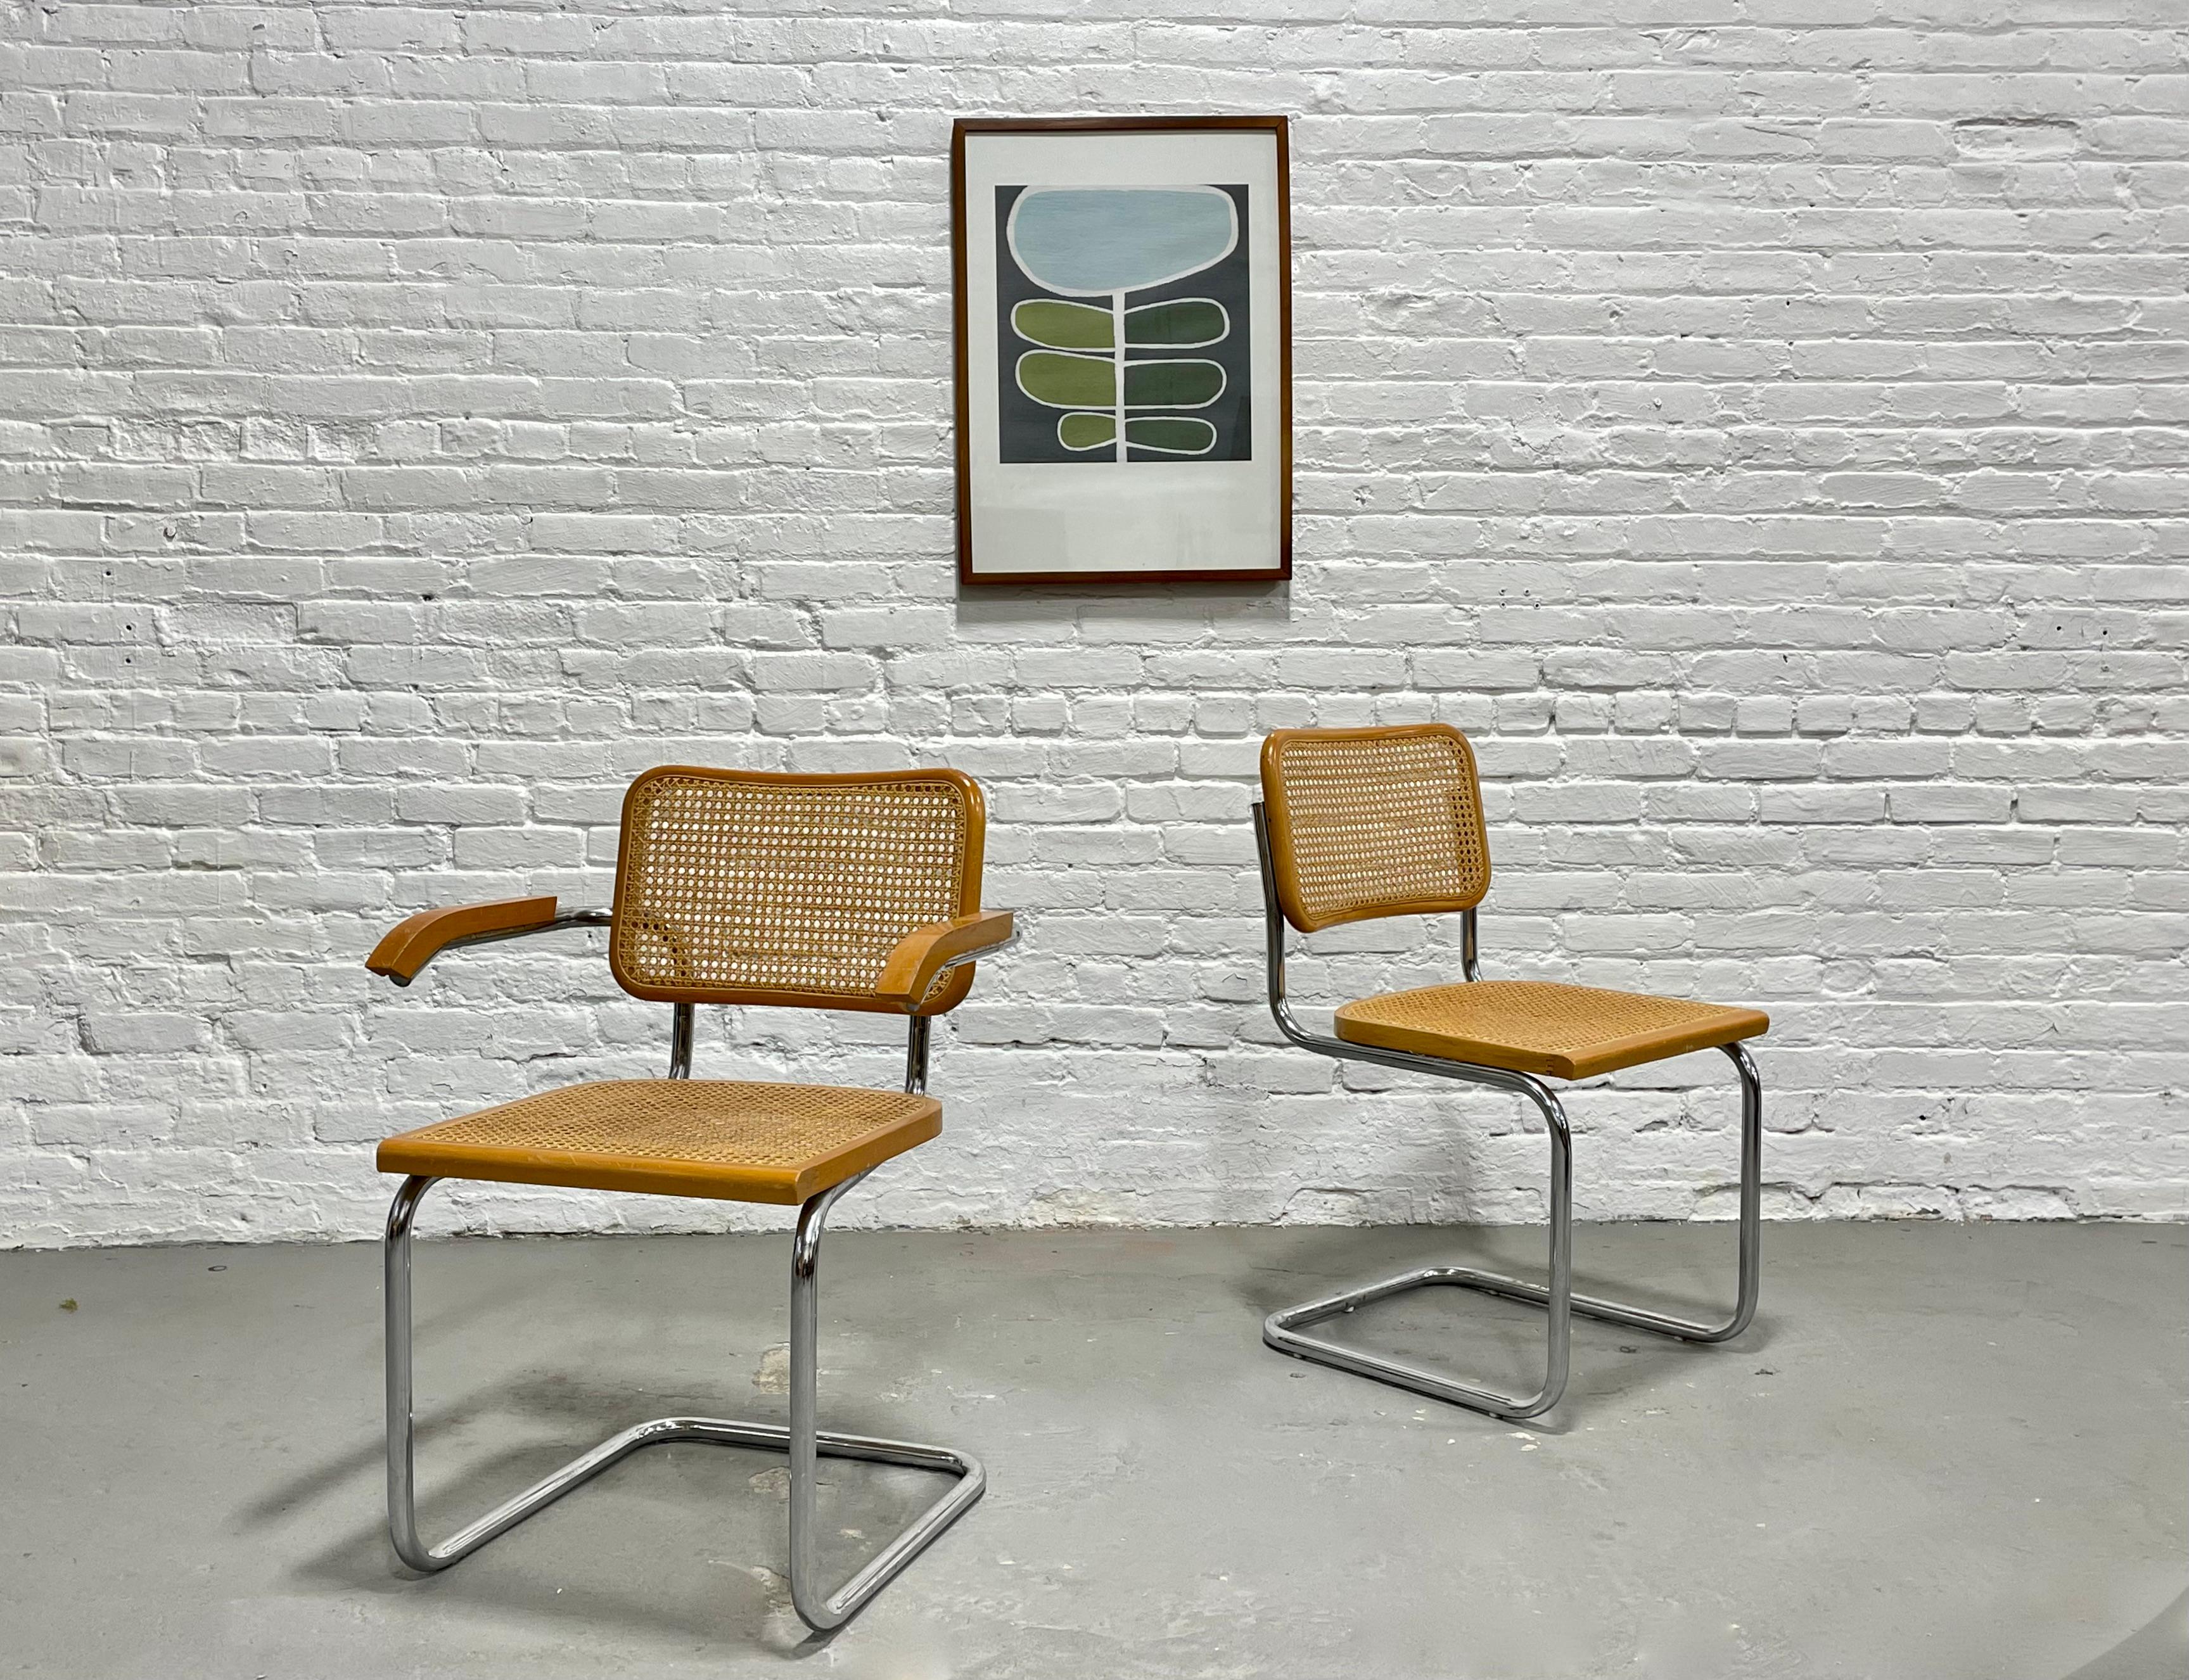 Marcel Breuer Cesca styled Mid Century Modern dining chairs, a Pair. The frames are constructed of tubular steel and the caned backs are unbroken and lovely, with finger joint detailing along the seat edges. Lovely vintage condition with some wear